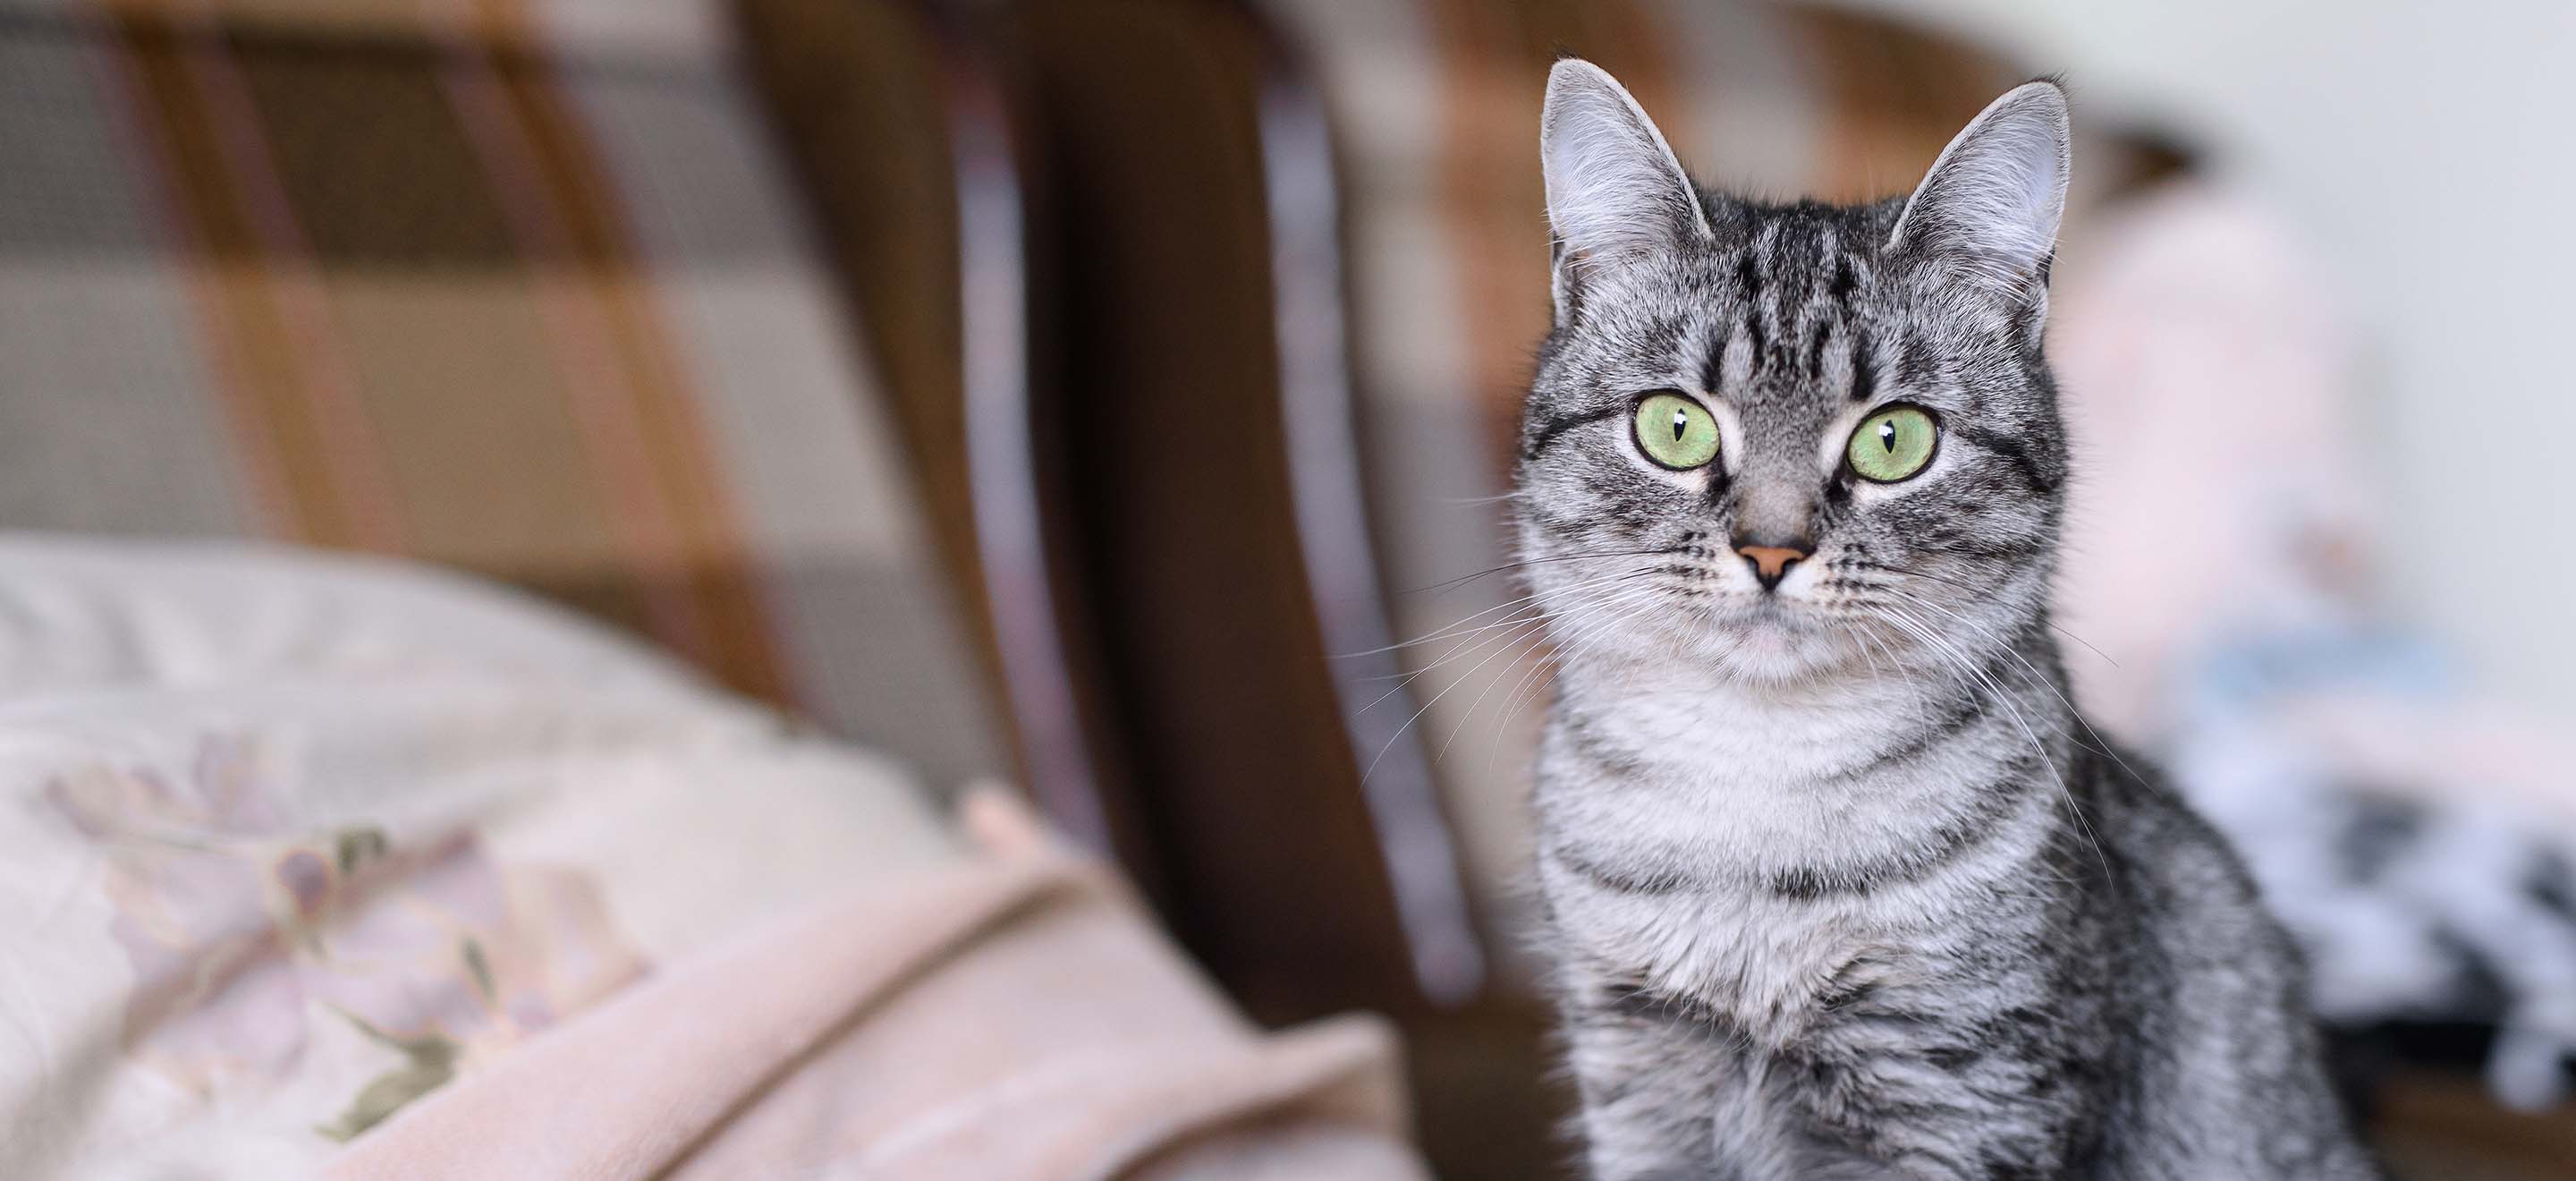 Gray striped cat looking at the camera while seated on the bed image